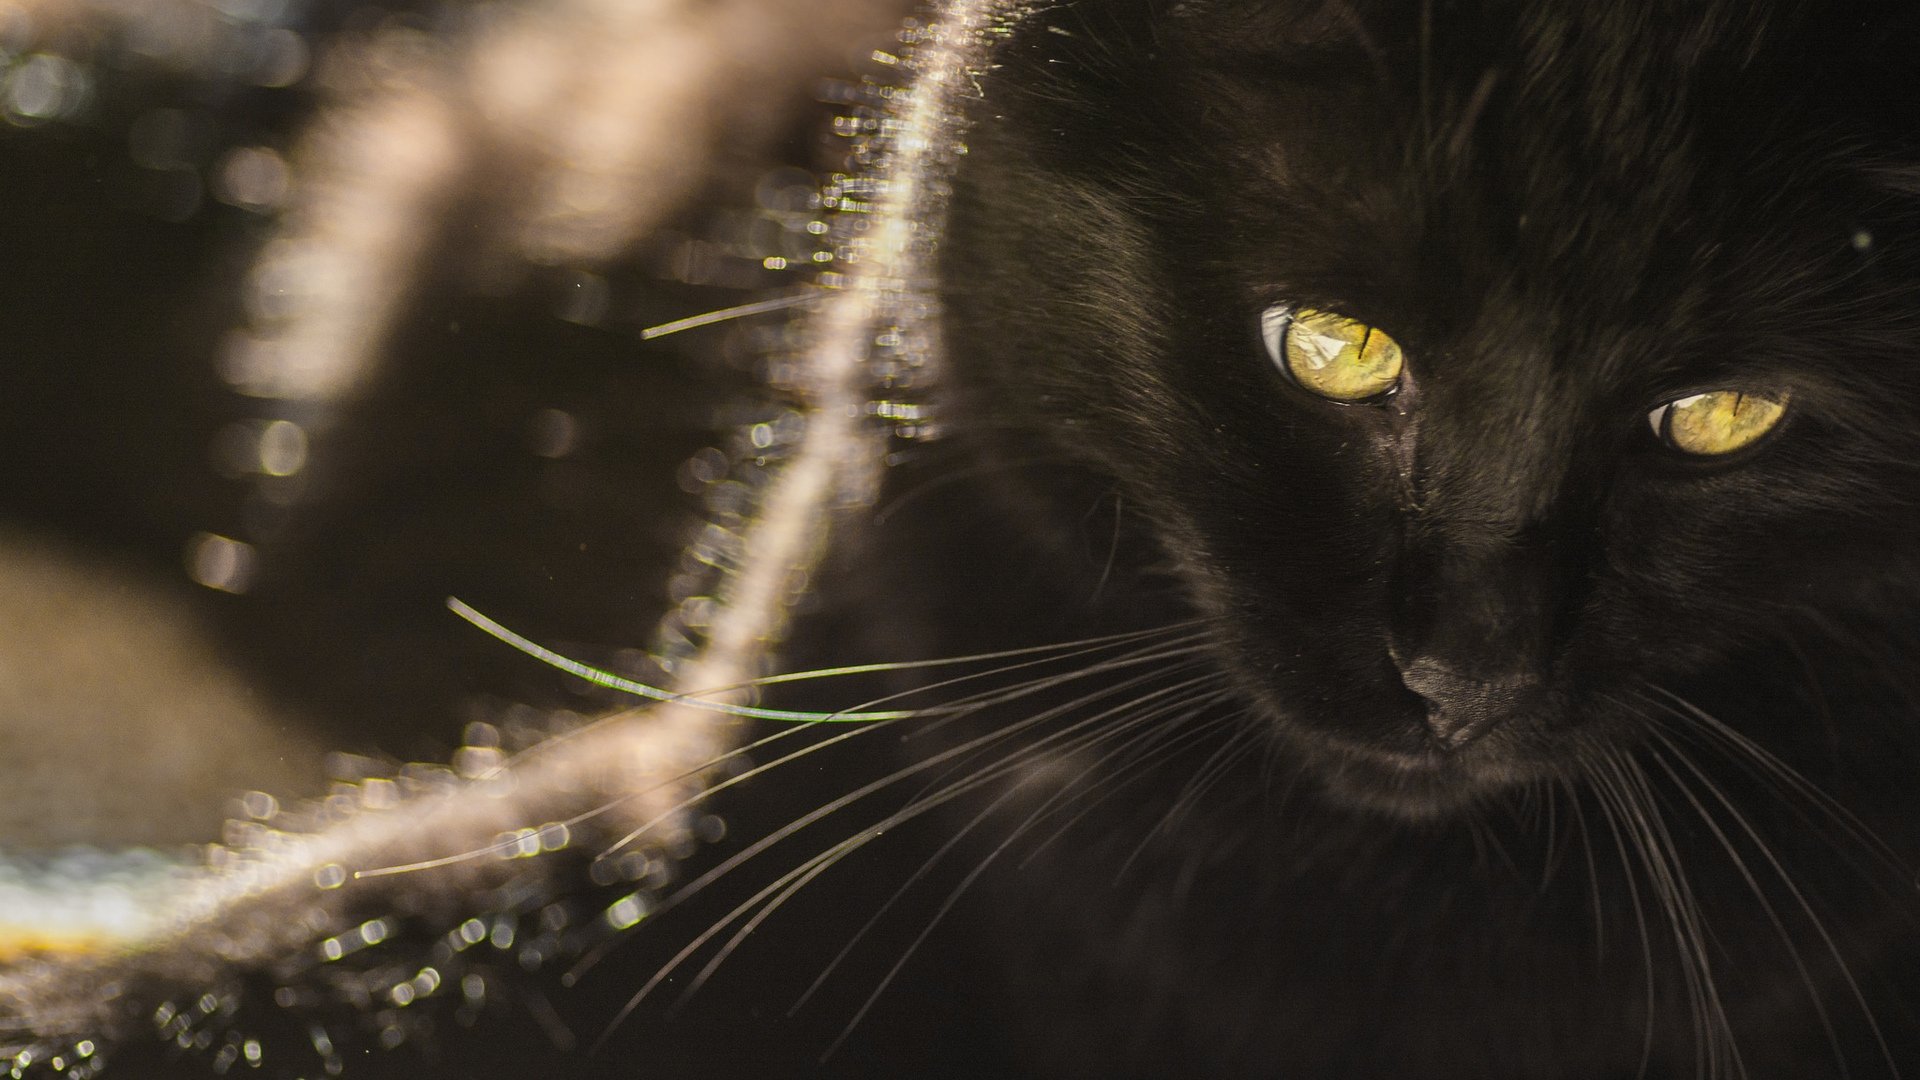 Black Cat with Yellow Eyes for 1920 x 1080 HDTV 1080p resolution